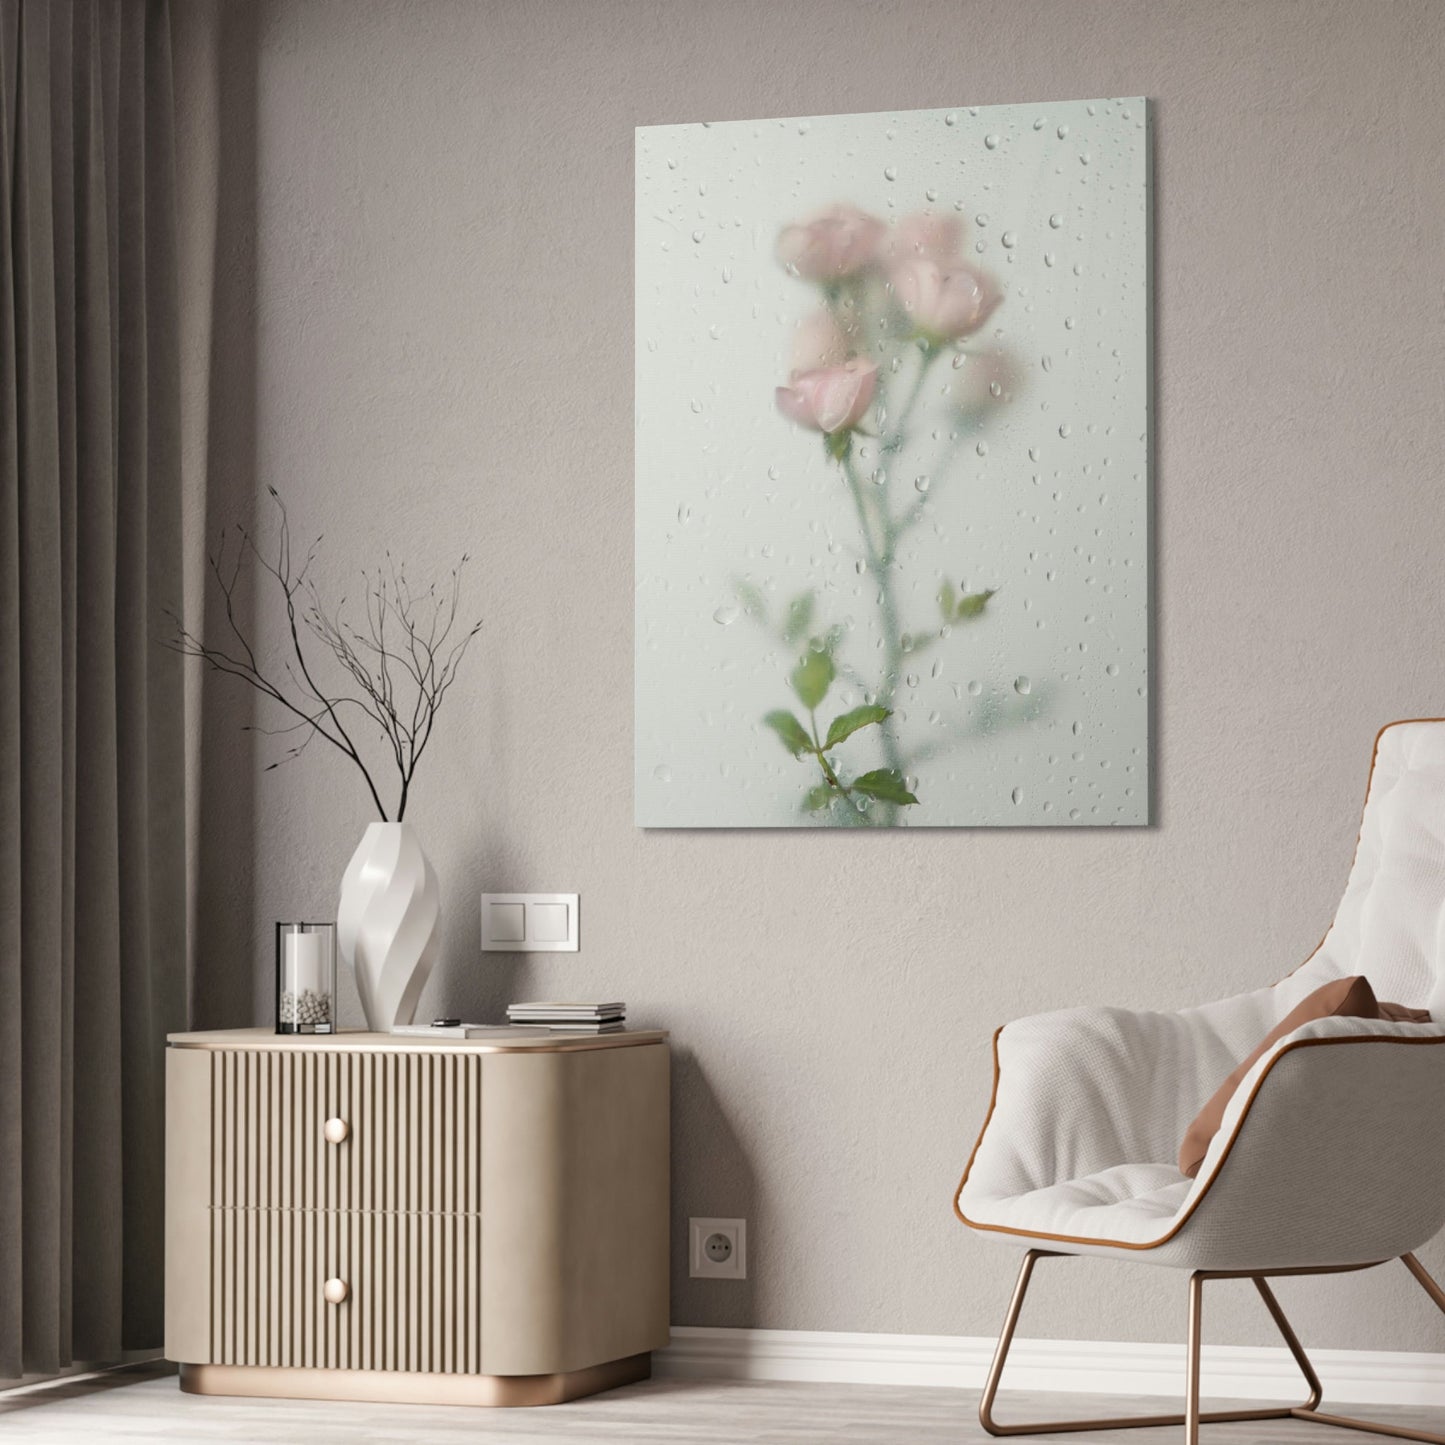 The Art of Roses: A Detailed and Intricate Painting on Canvas